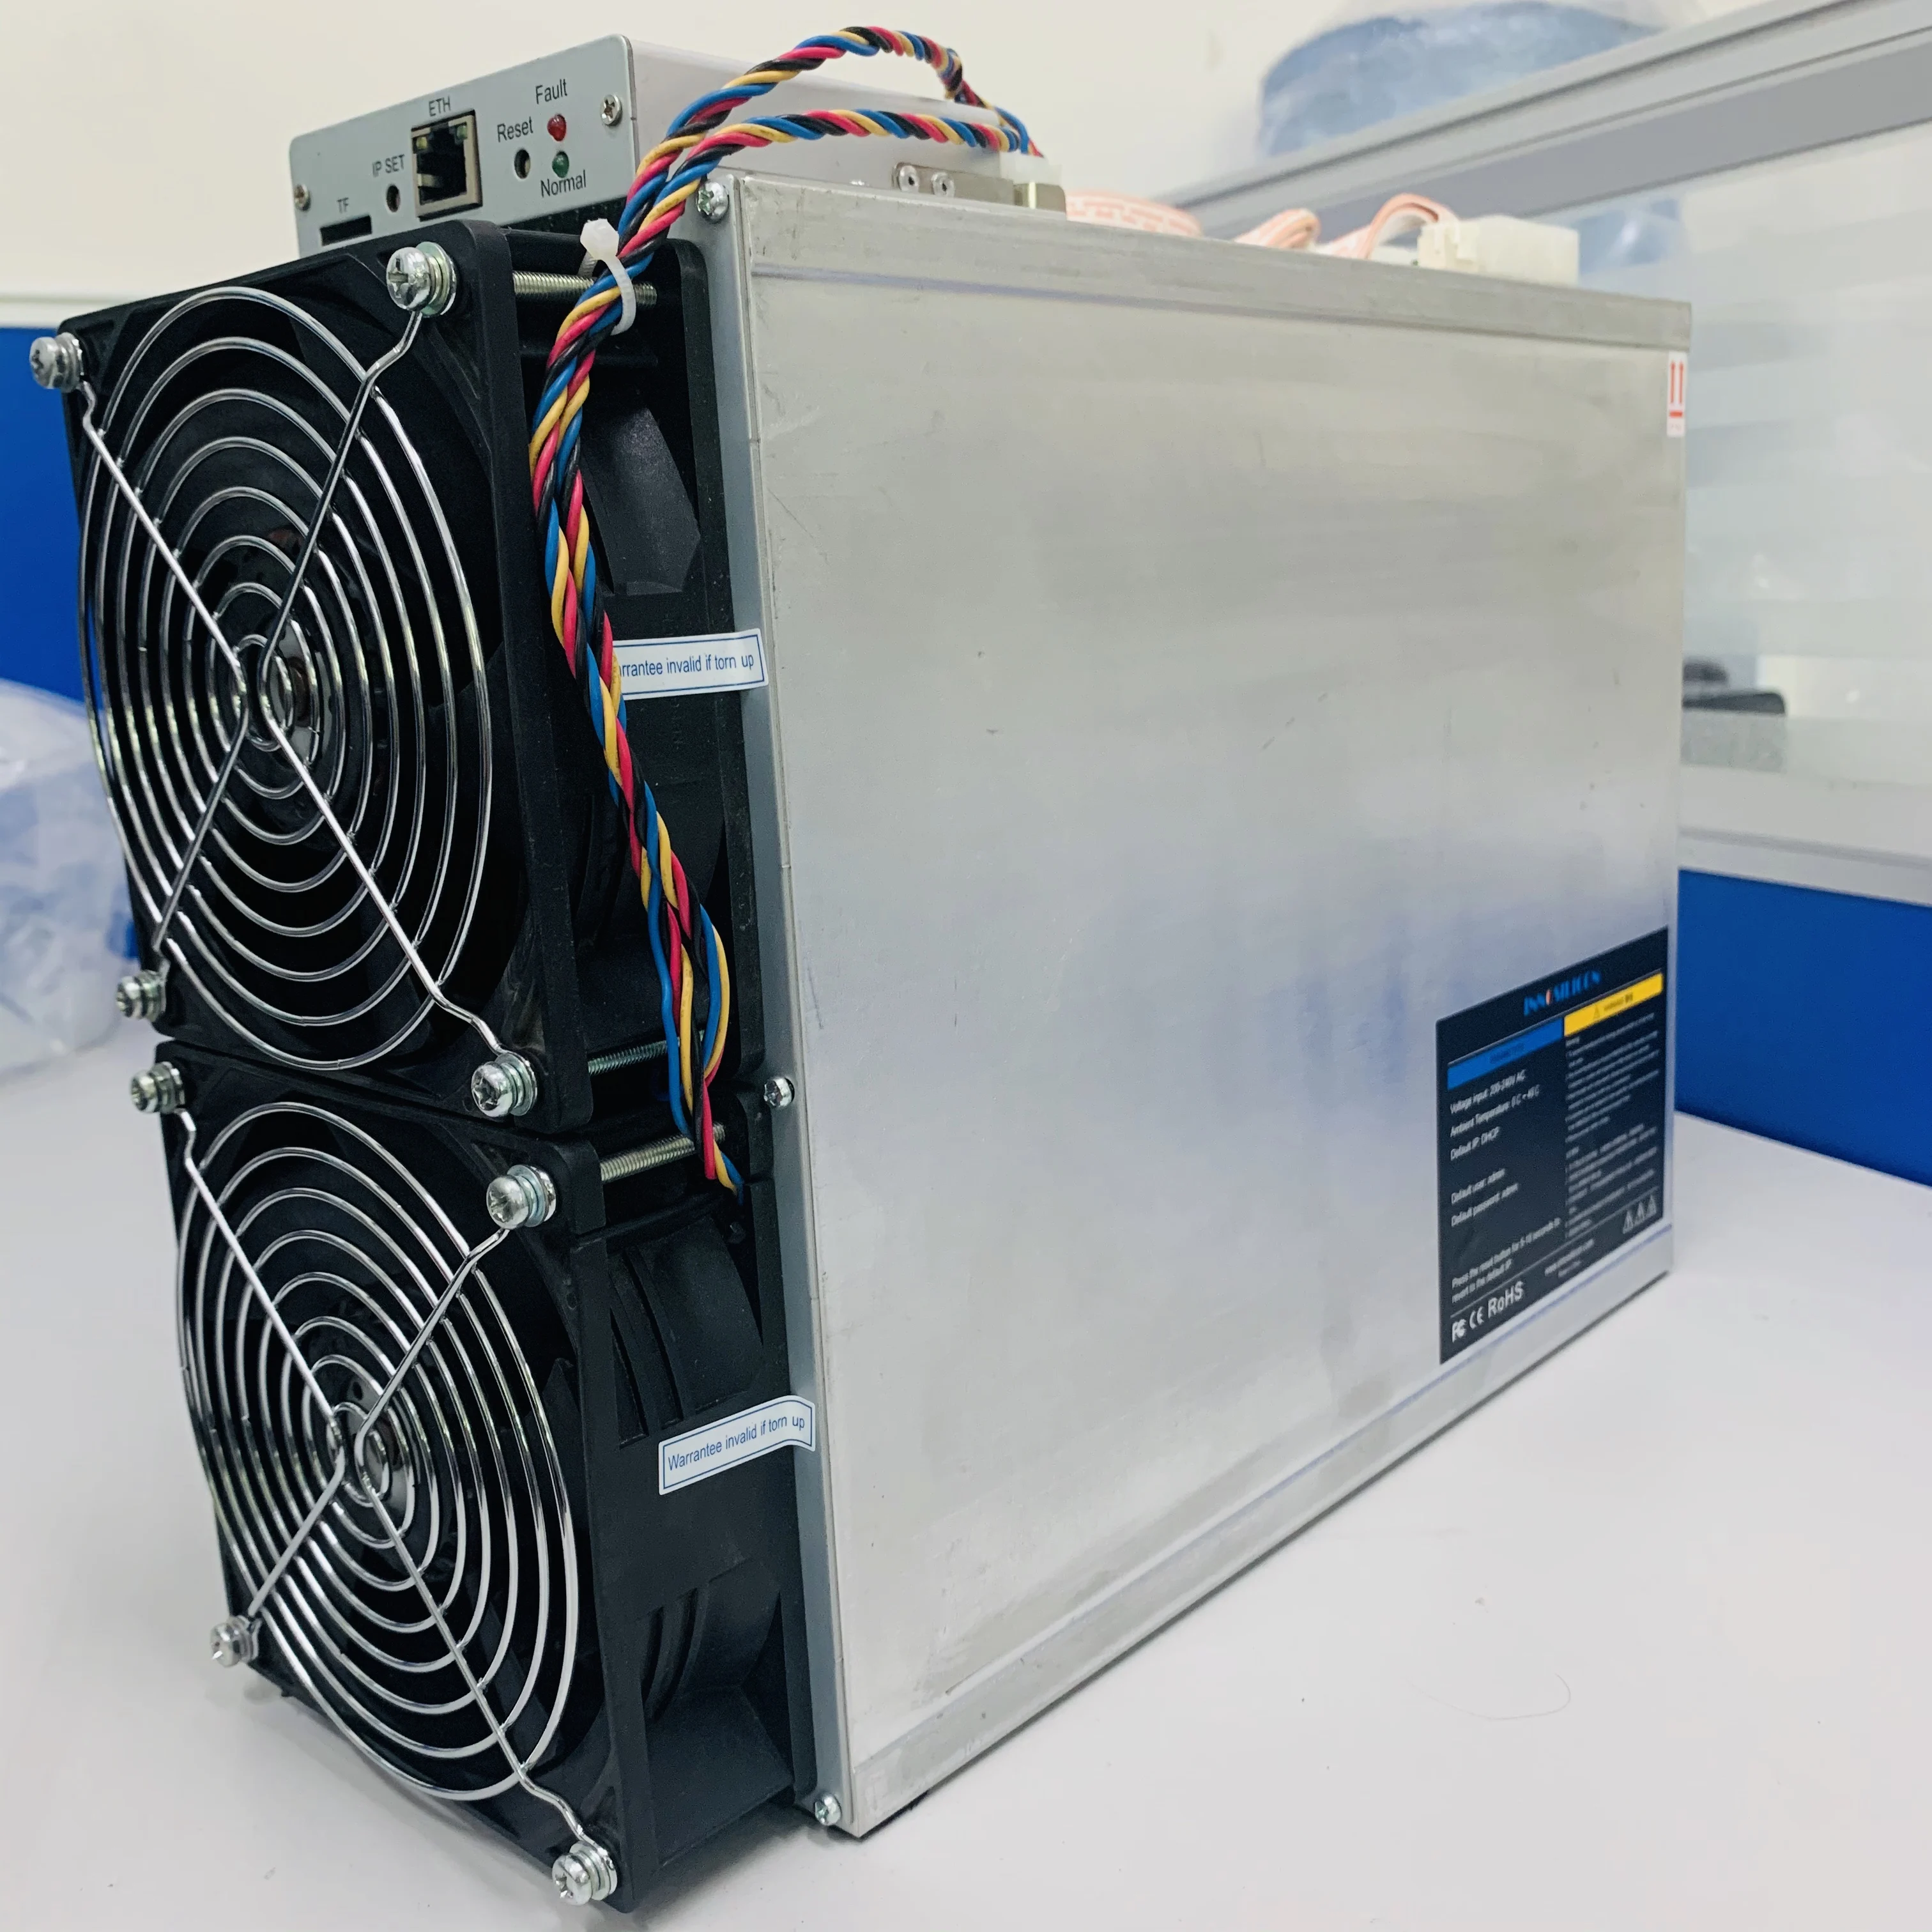 

A10 PRO Pro+ 500Mh 720ETH Master ETHKing ETH coin asic miner with ETHMaster algorithm A10 PRO 500Mh, Siver